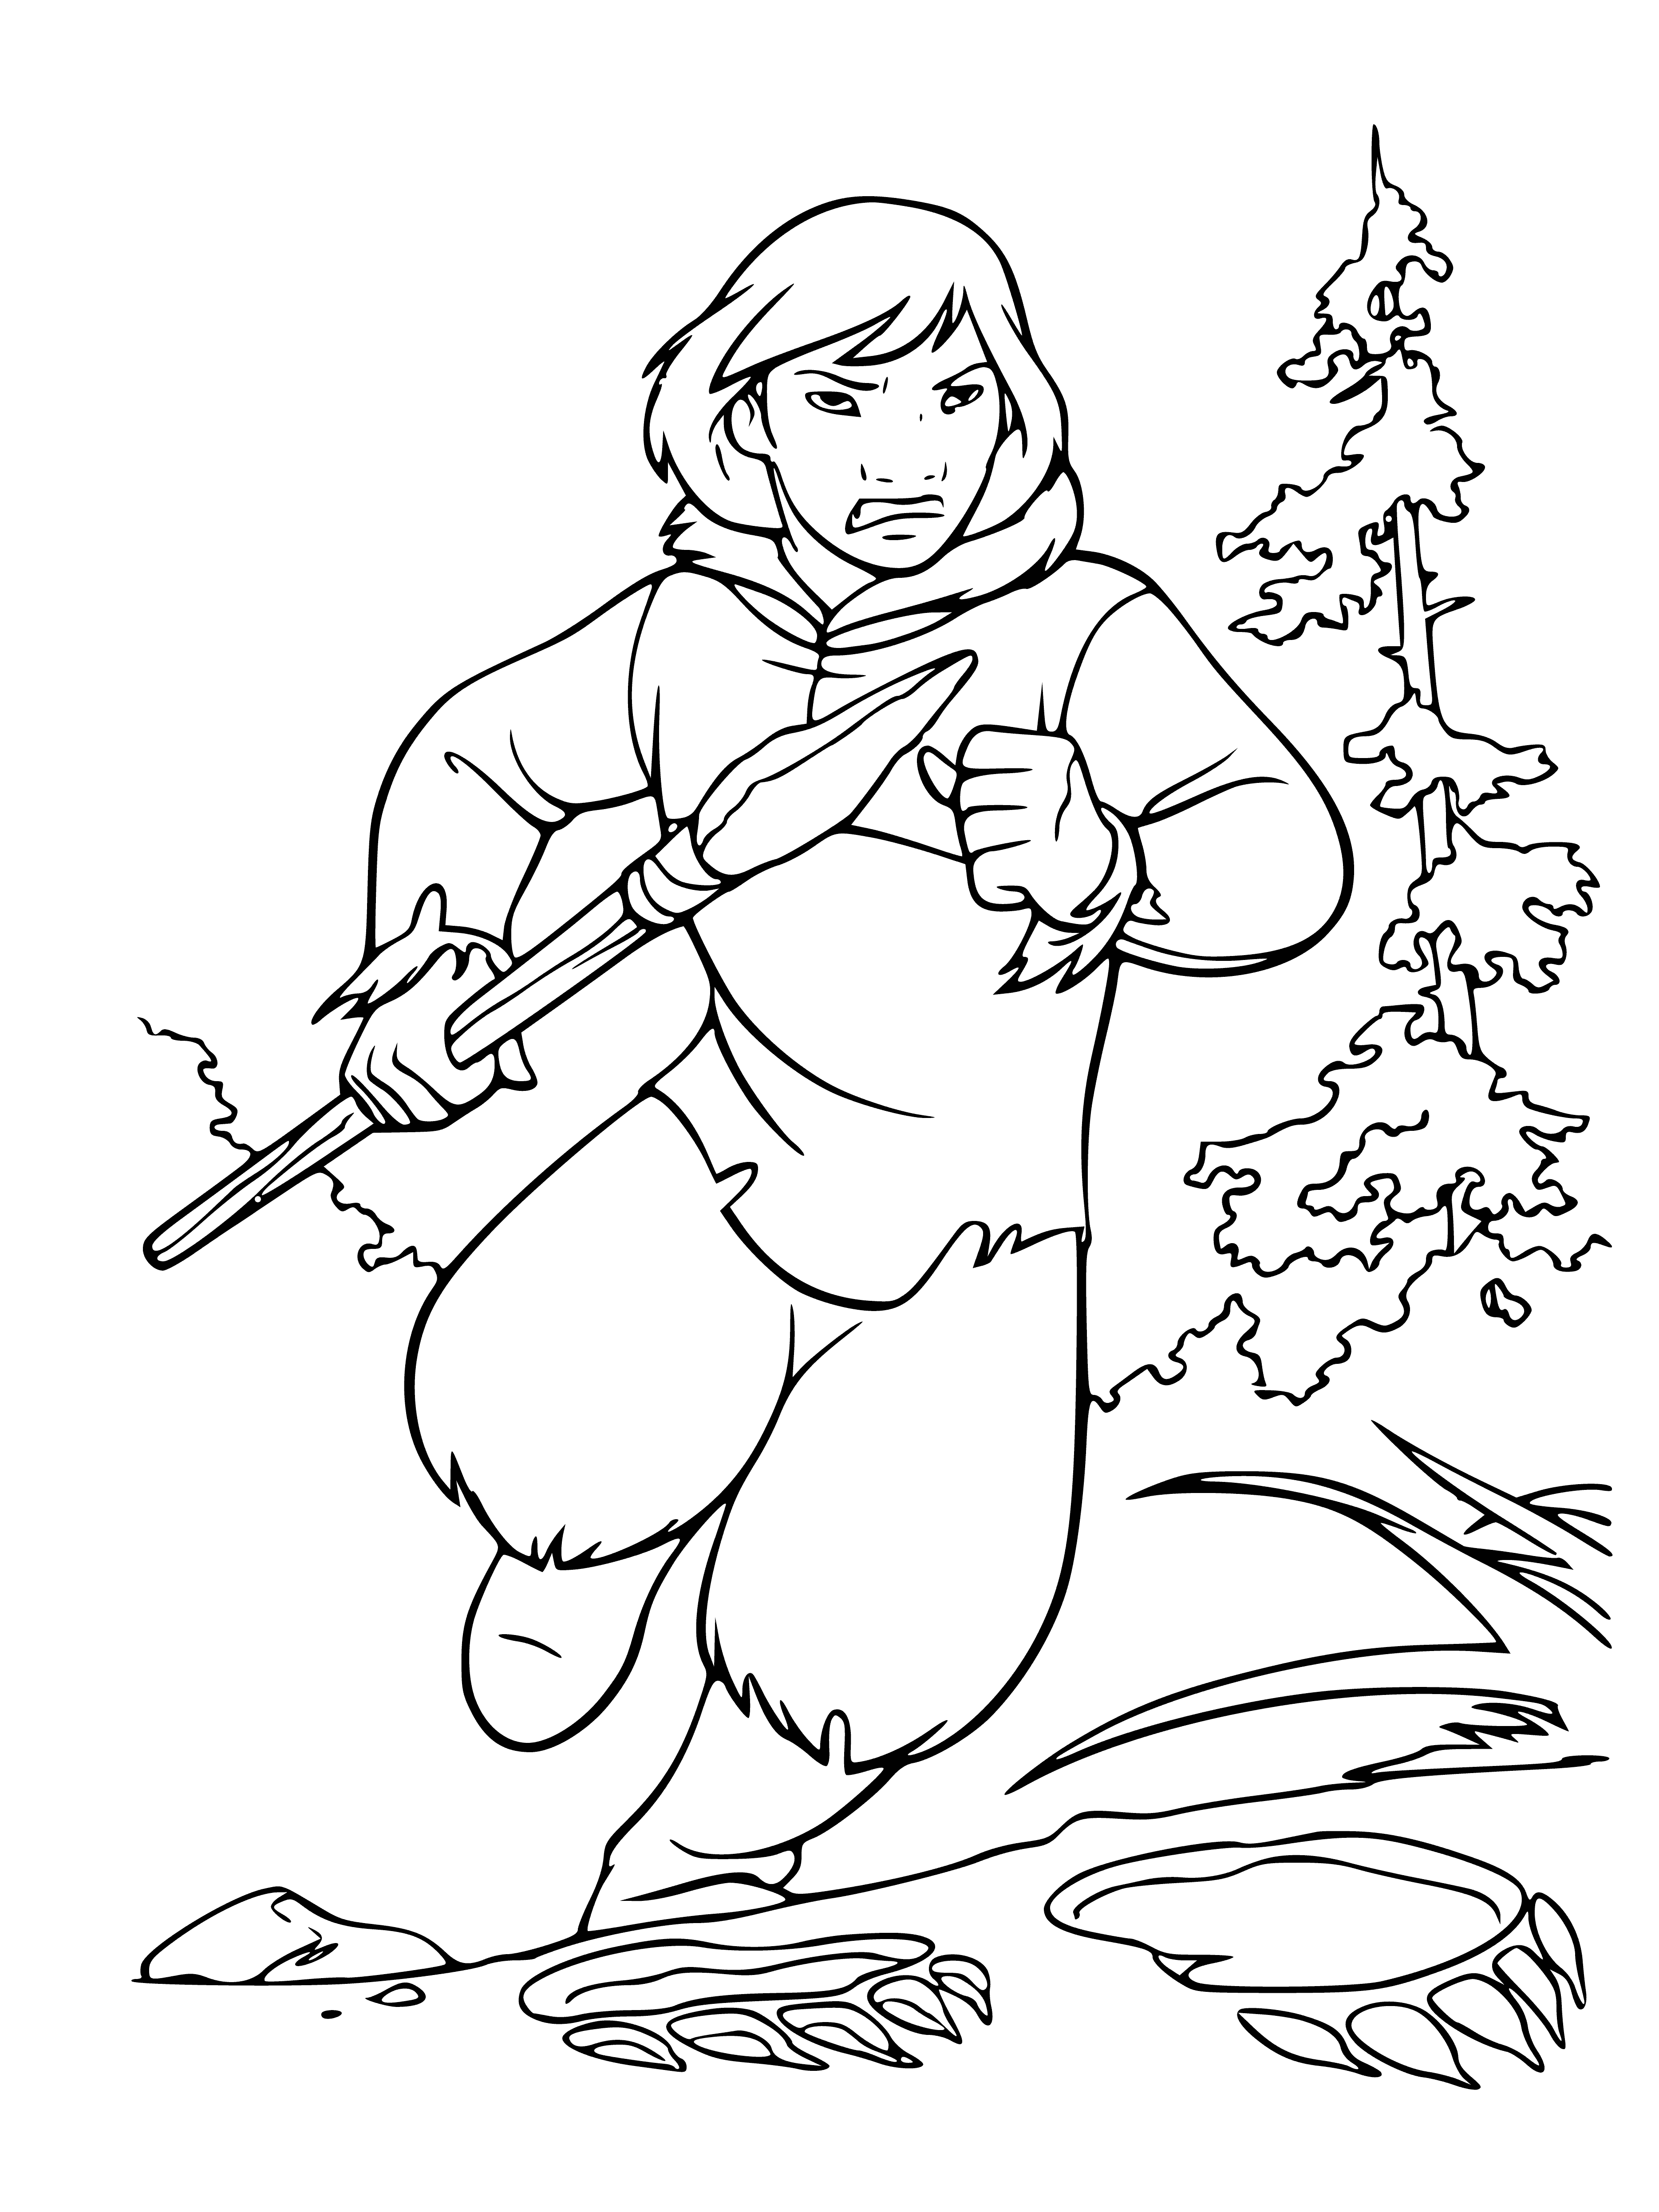 The hunt has begun coloring page